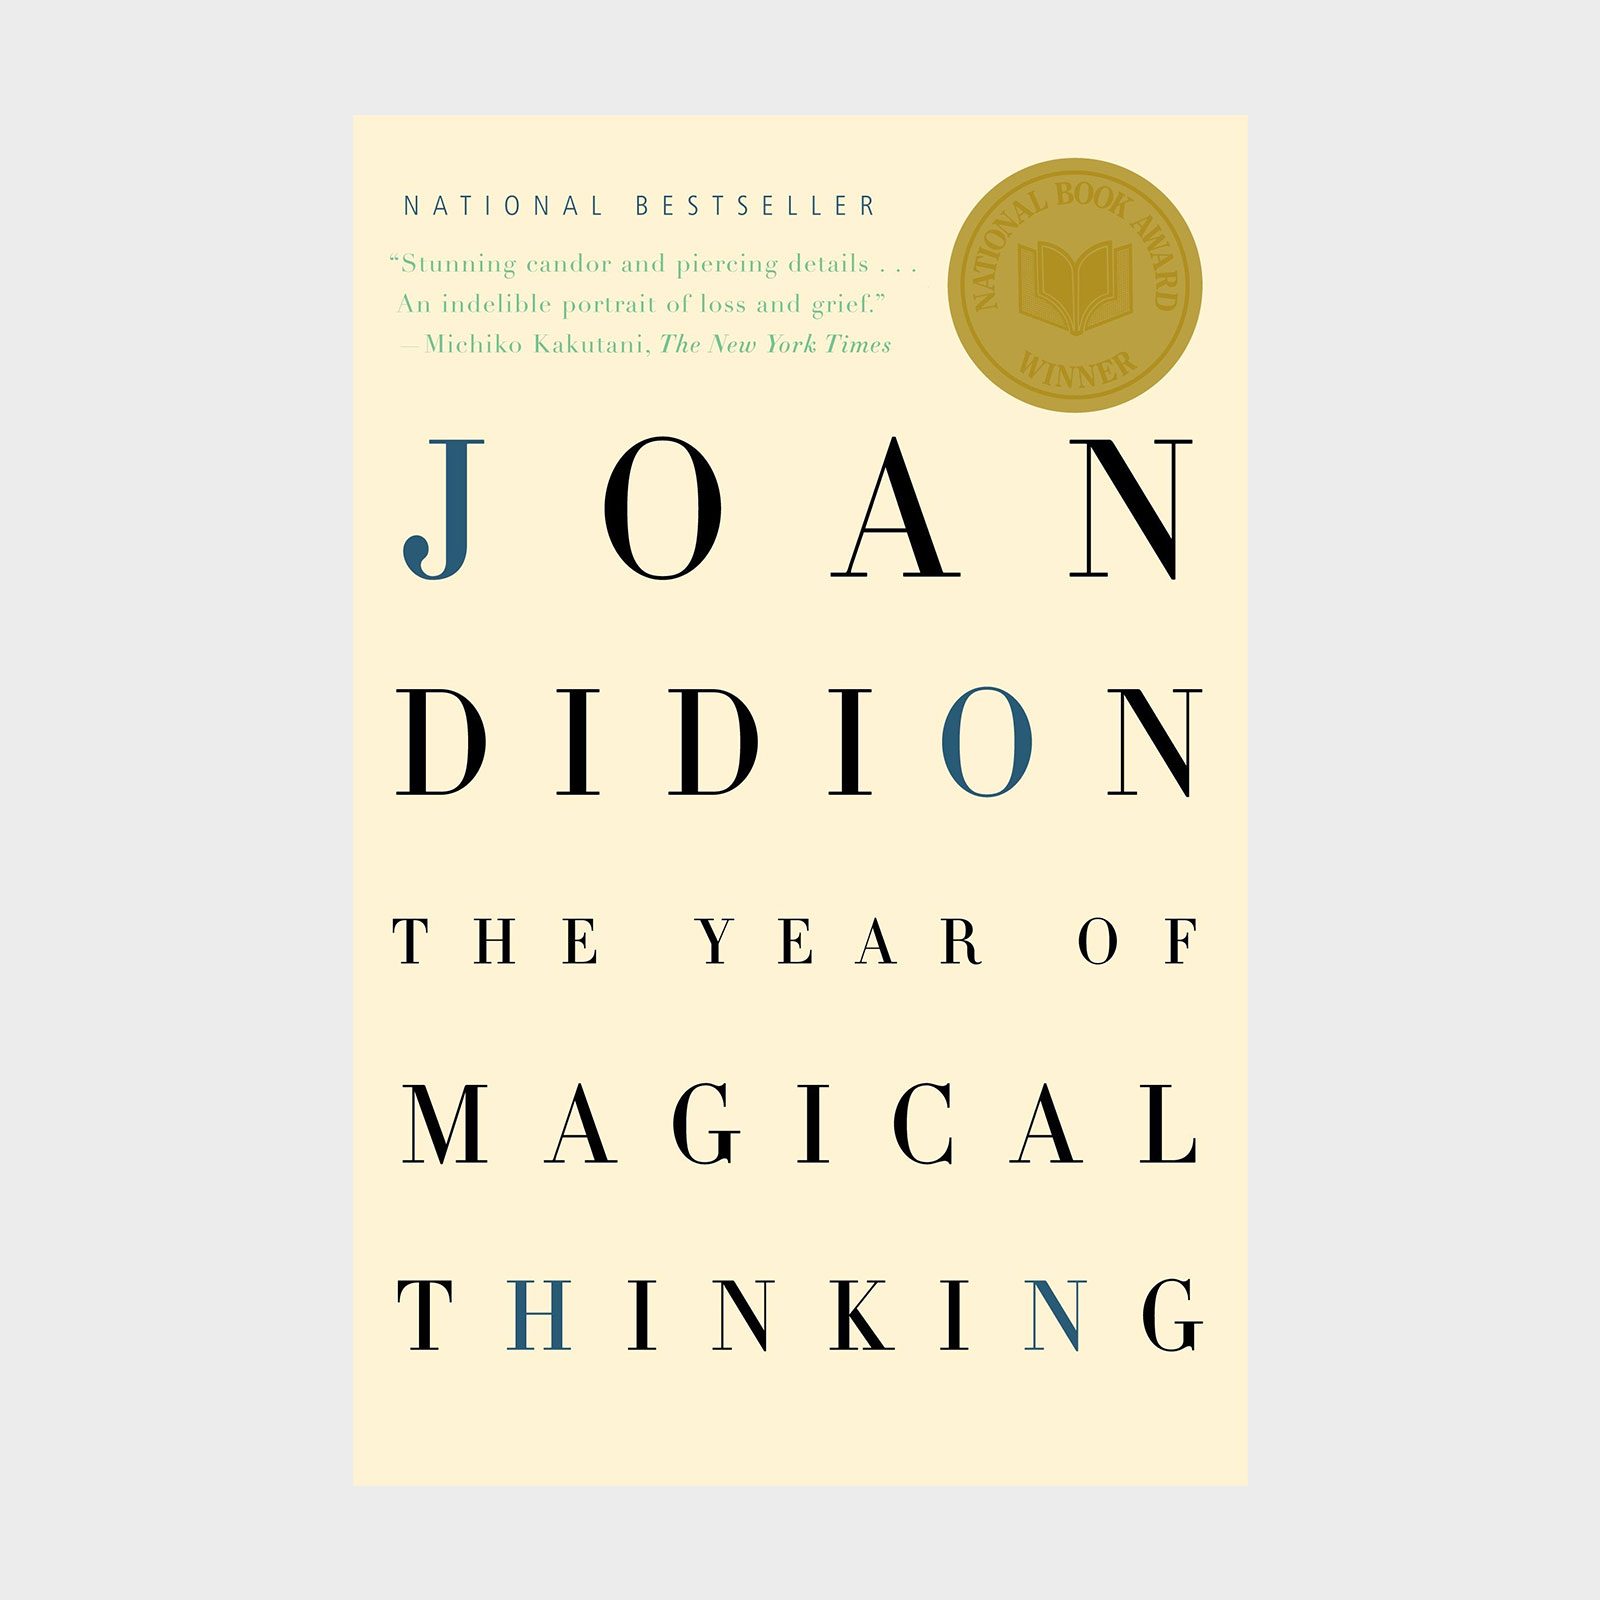 <p>From one of America's most iconic writers, Joan Didion's 2007 heartfelt book <a href="https://www.amazon.com/Year-Magical-Thinking-Joan-Didion/dp/1400078431" rel="noopener"><em>The Year of Magical Thinking</em></a> is both a <em>New York Times</em> bestseller and winner of the National Book Award. She chronicles her experience after the unexpected death of her husband just weeks after her daughter was placed on life support, and the six-hour brain surgery her daughter endured just two months later. Didion uses her lived experience to share a powerful book on loss, love and life itself, packed with <a href="https://www.rd.com/list/uplifting-quotes/" rel="noopener noreferrer">inspirational quotes</a> and reflections on longing.</p> <p class="listicle-page__cta-button-shop"><a class="shop-btn" href="https://www.amazon.com/Year-Magical-Thinking-Joan-Didion/dp/1400078431/">Shop Now</a></p>